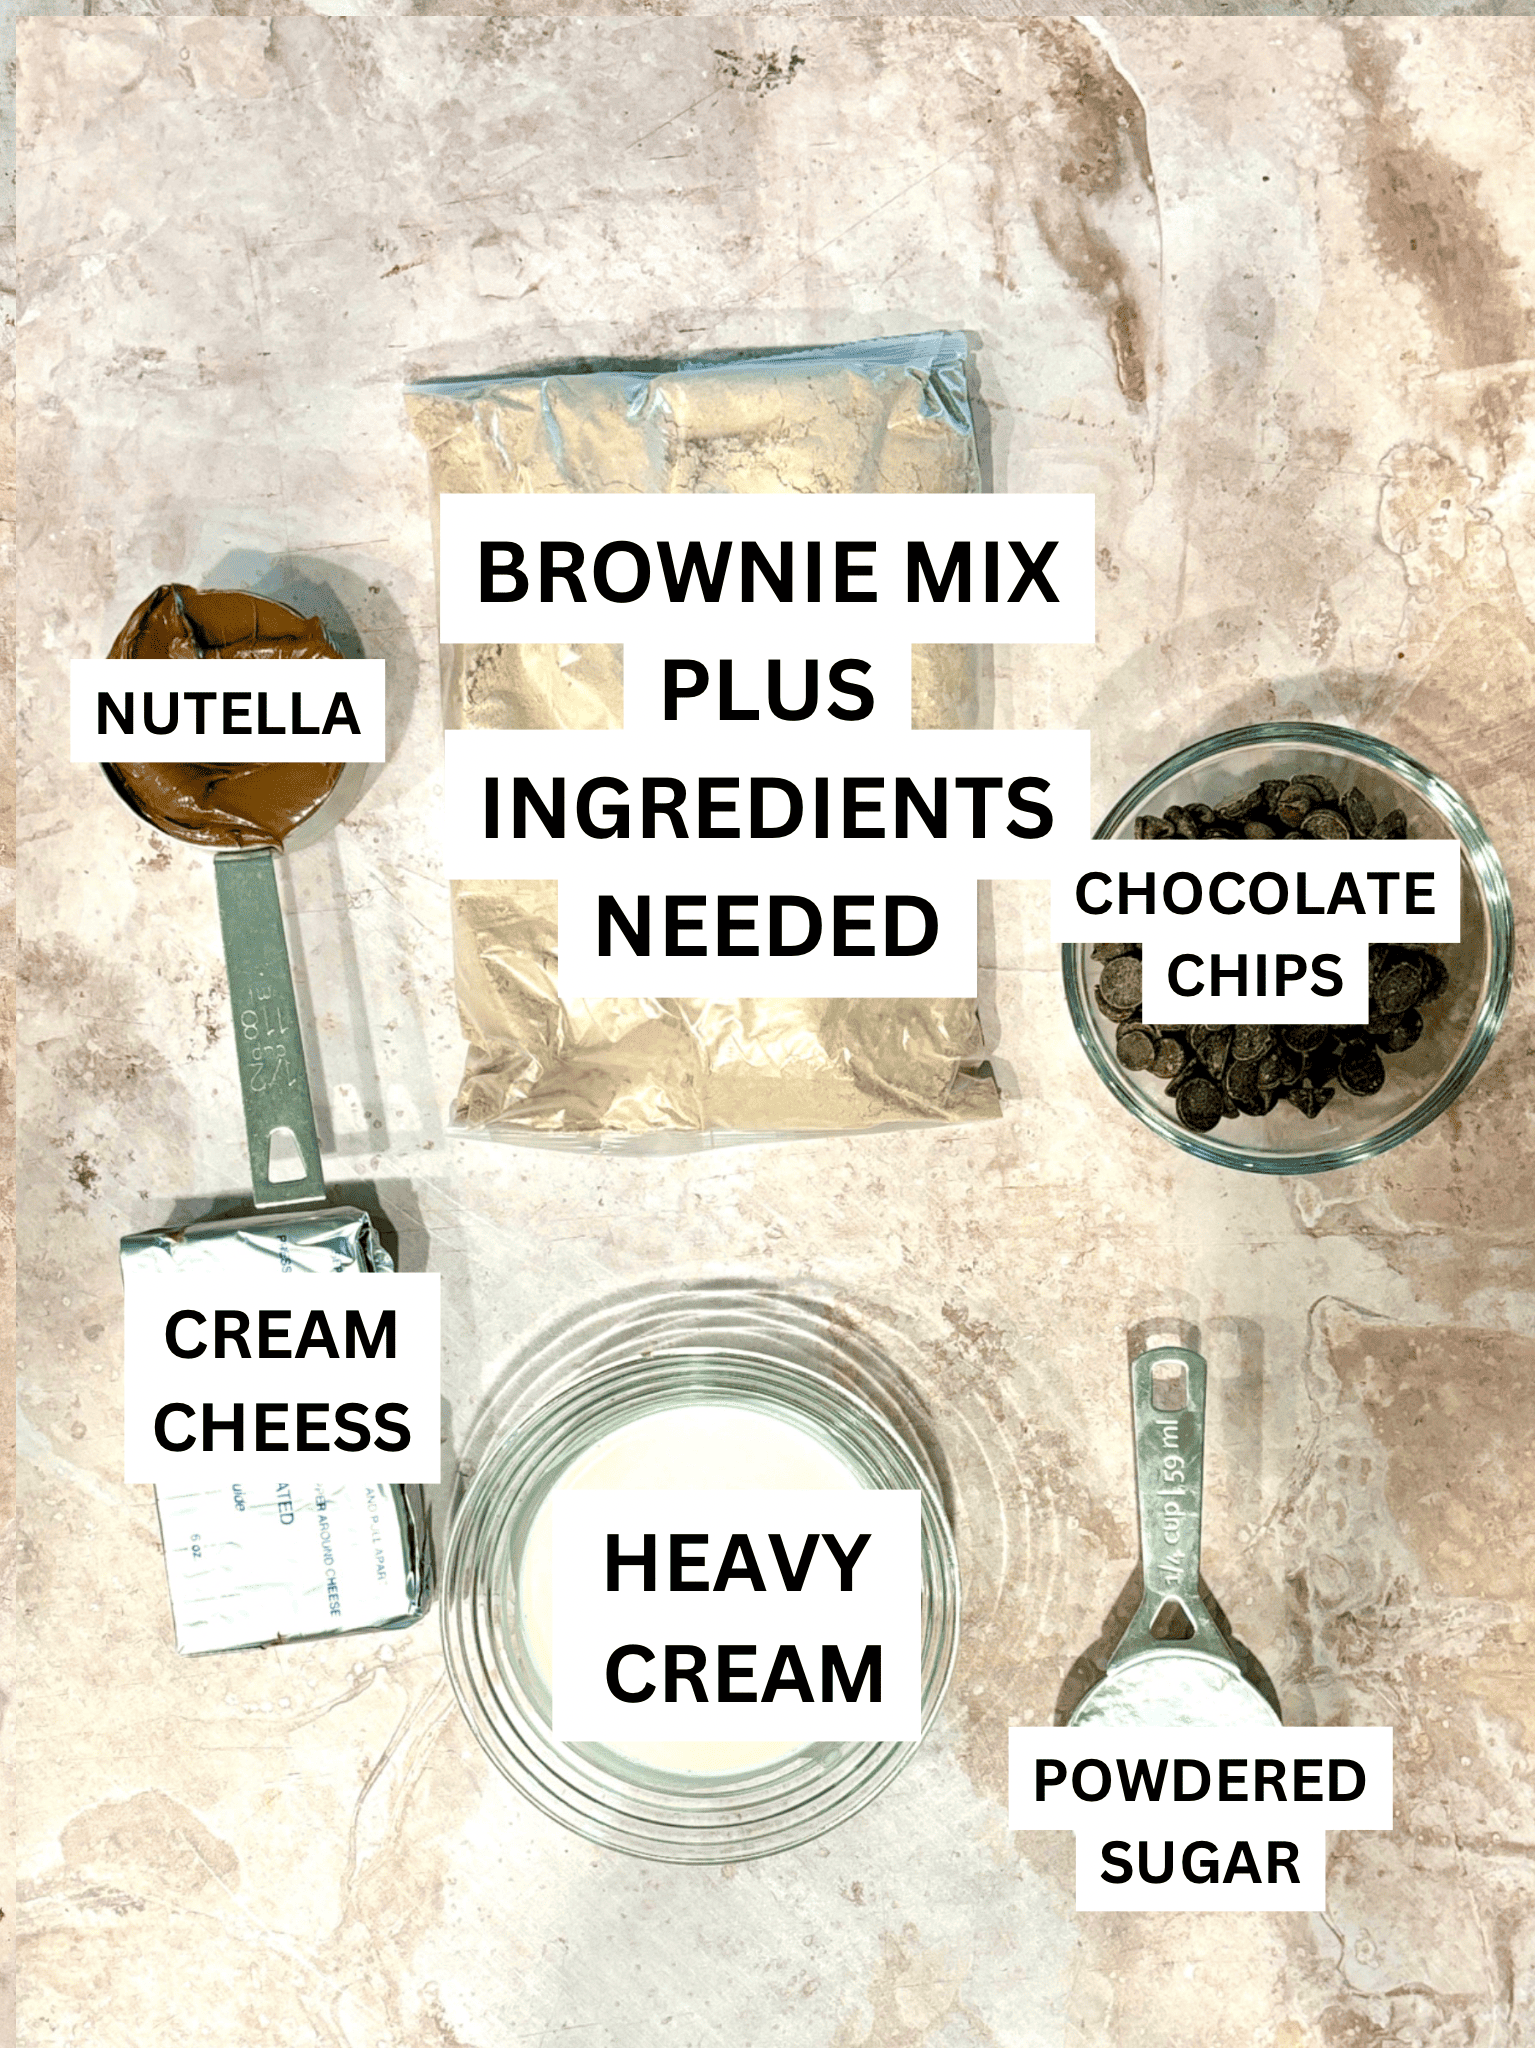 Ingredients layed out on the counter, brownie mix, cream cheese, powdered sugar, Nutella, and heavy cream.